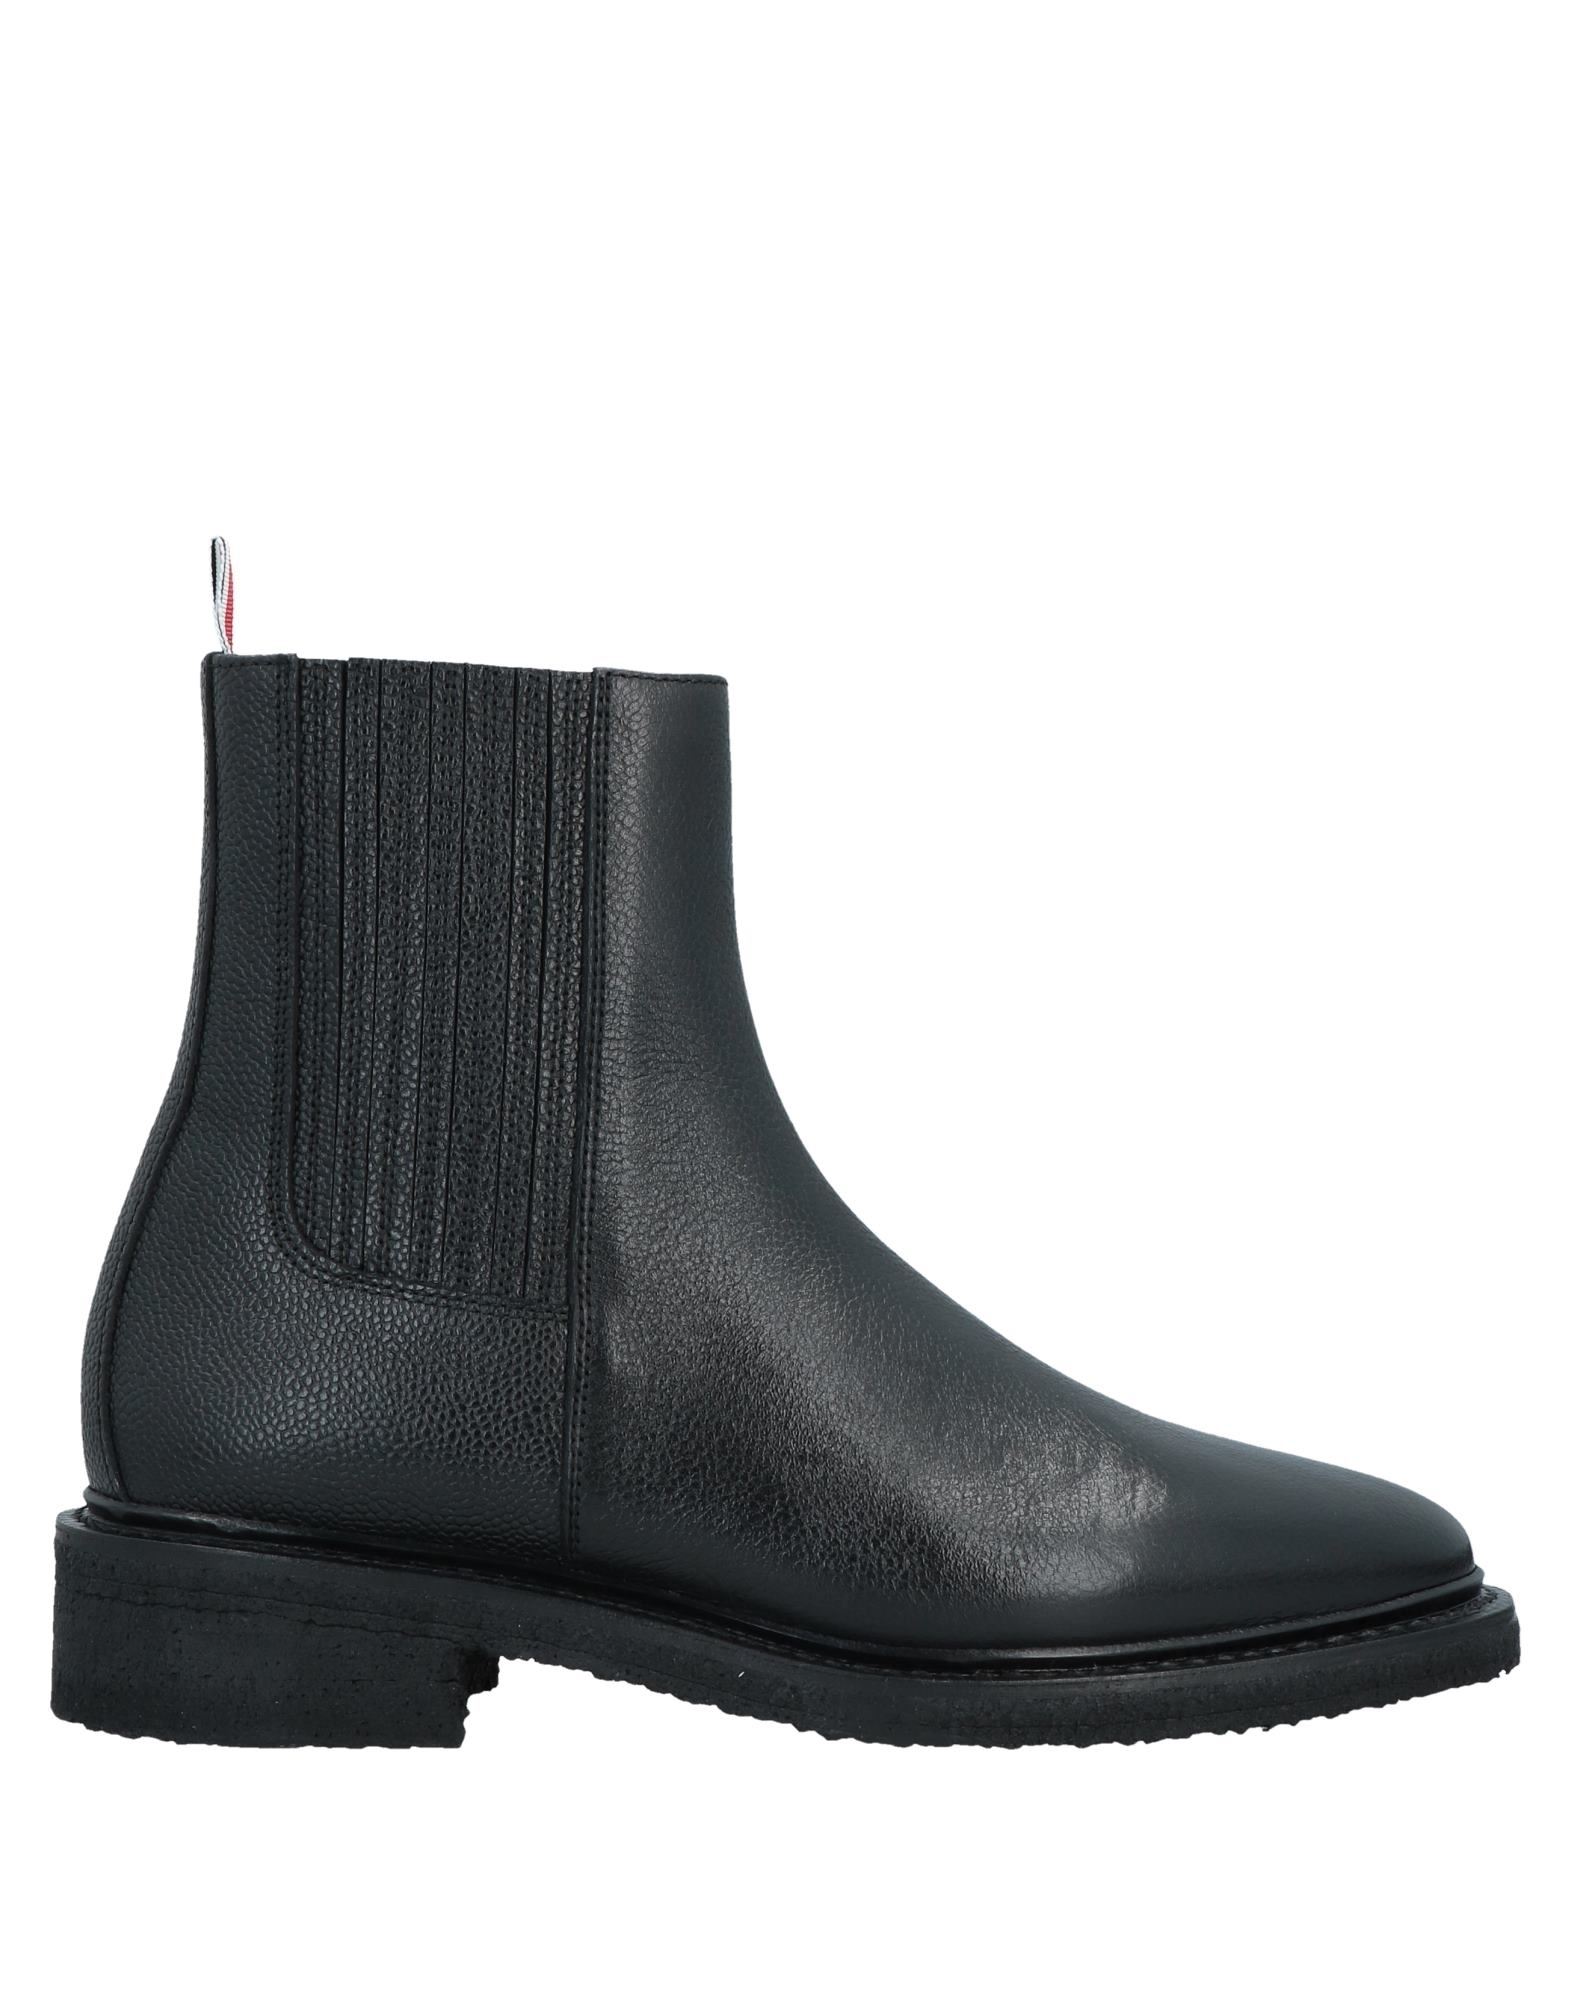 THOM BROWNE ANKLE BOOTS